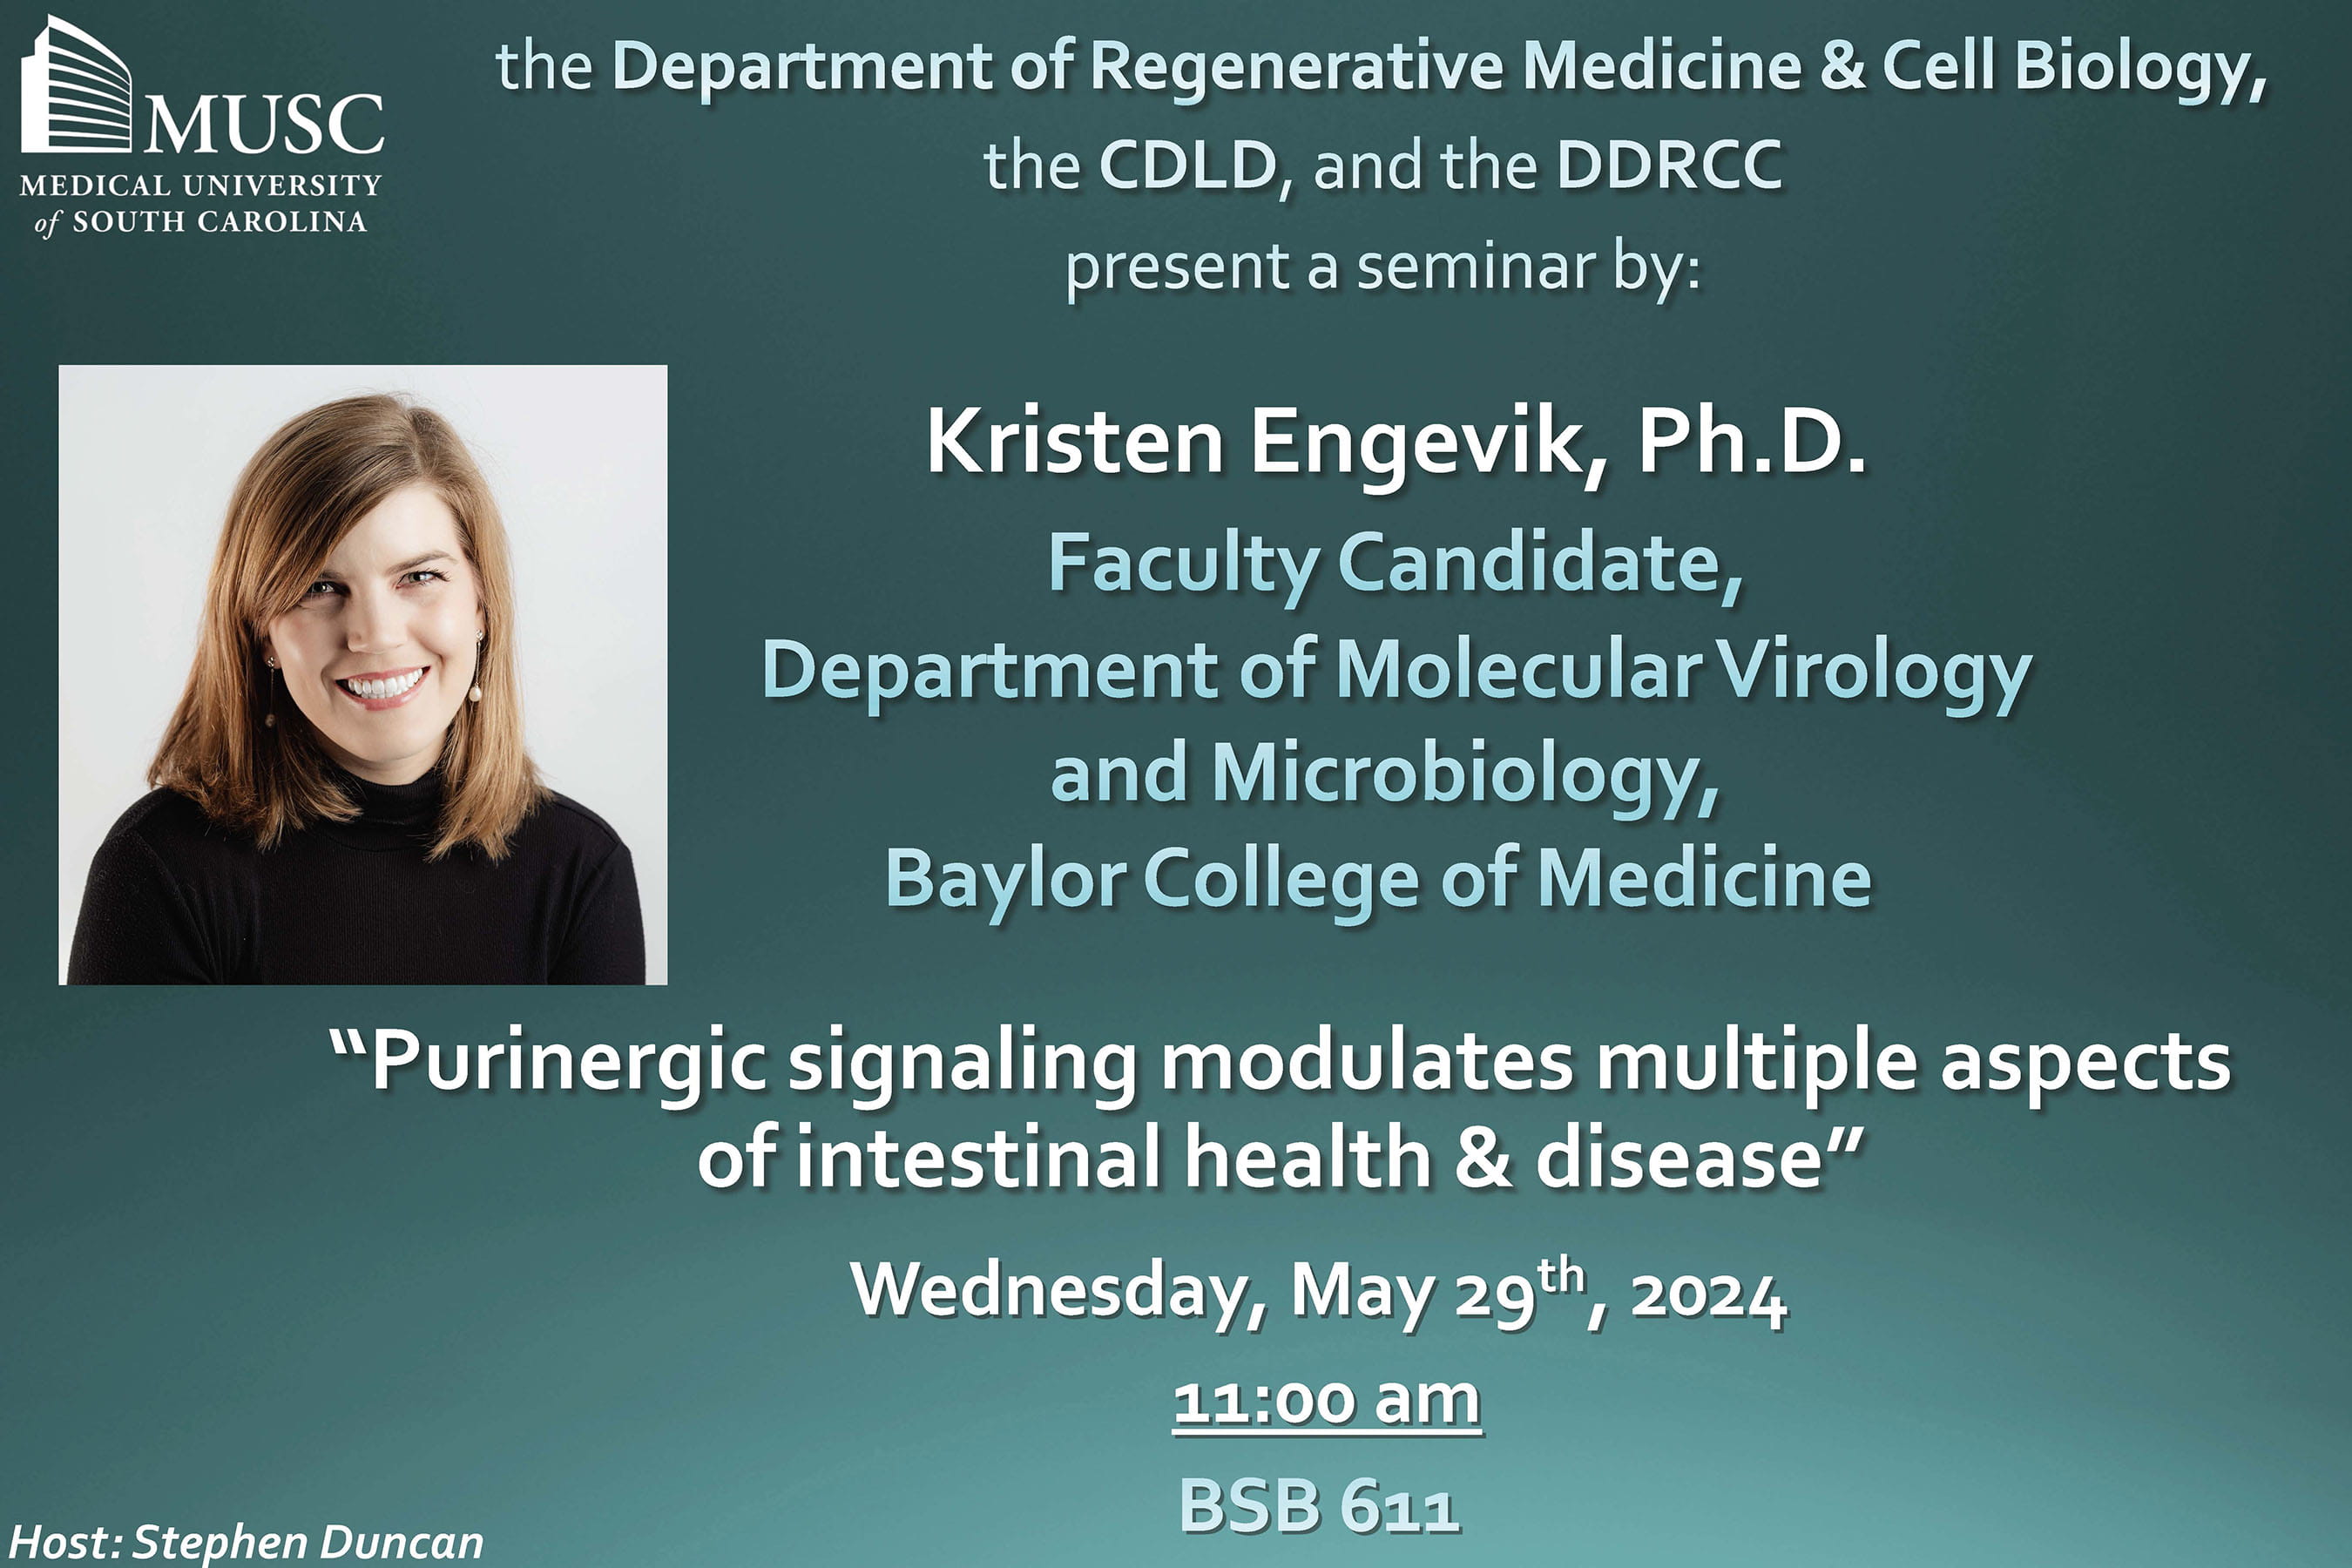 The Department of Regenerative Medicine and Cell Biology presents a seminar by Kristen Engevik, Ph.D. The seminar will be held in BSB 611 on Wednesday, May 29, 2024 at 11:00 AM